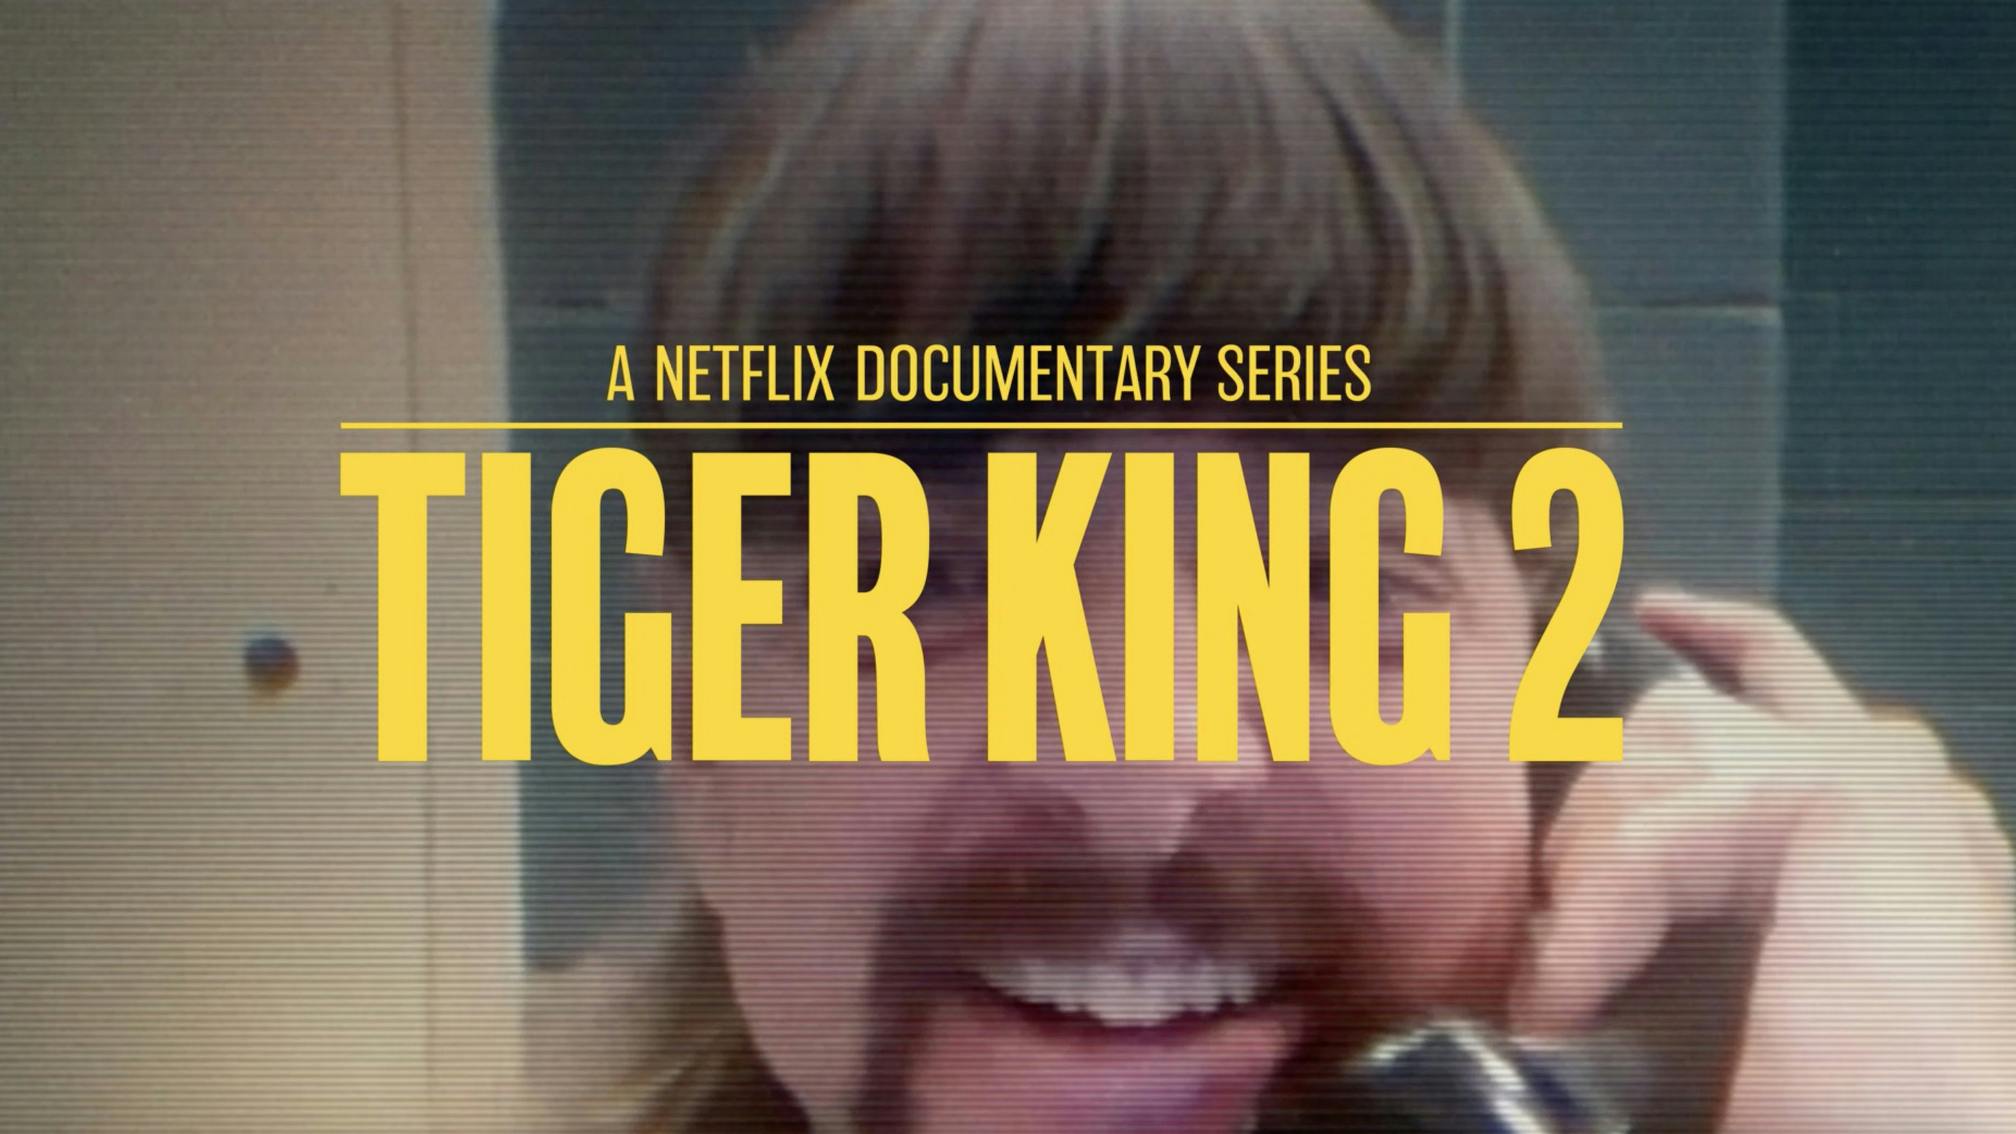 Netflix confirm that Tiger King 2 is "coming soon"